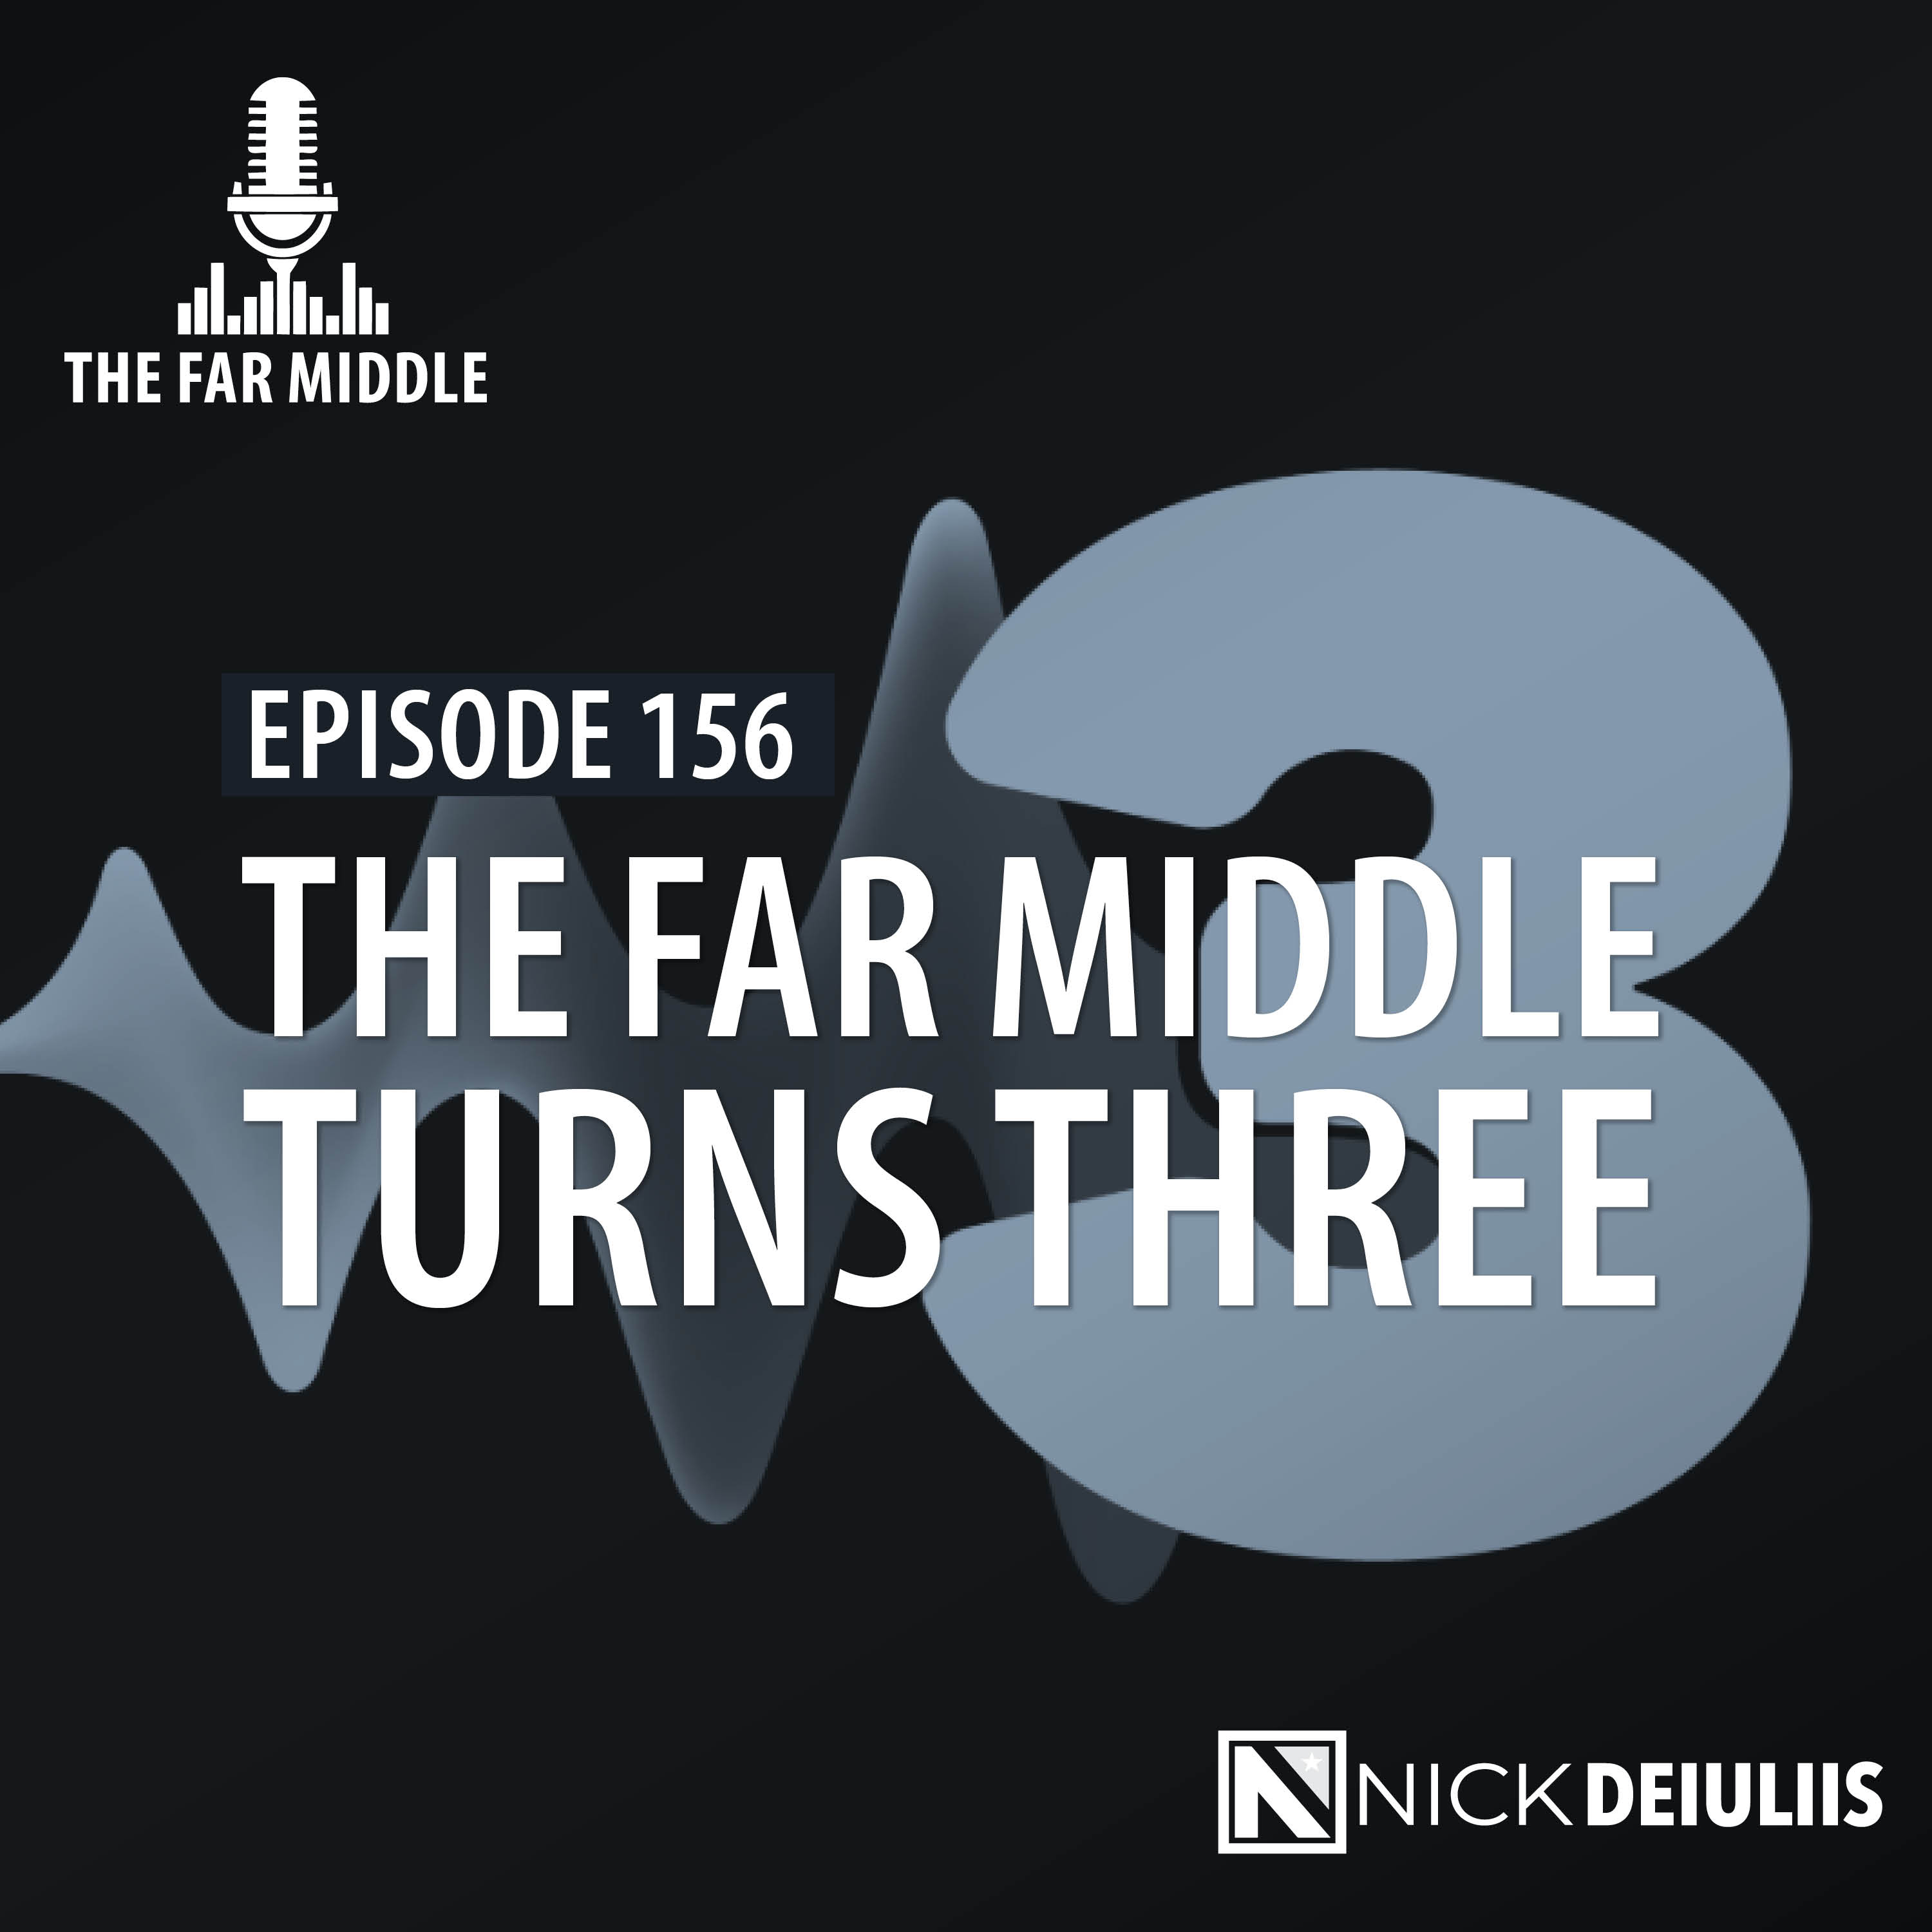 The Far Middle Turns Three